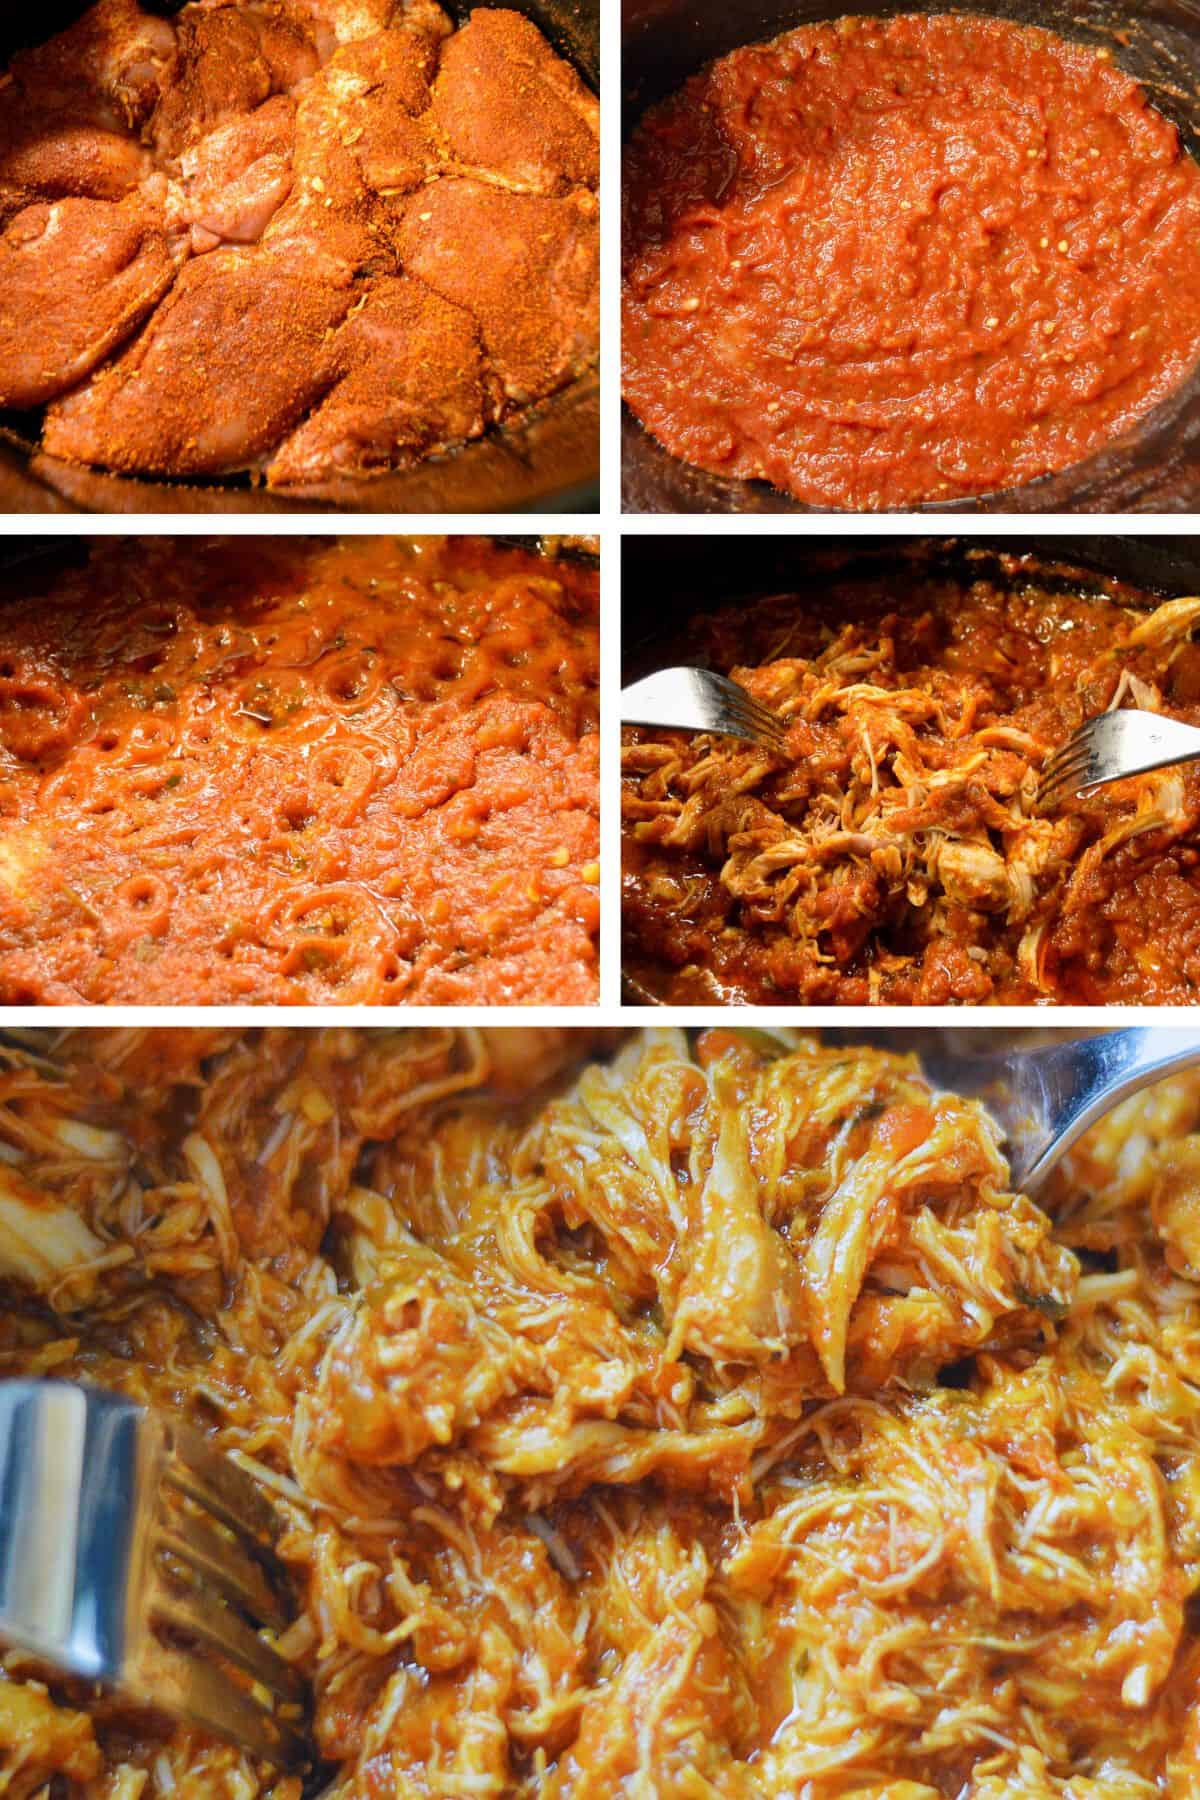 Steps collage for making shredded chicken tacos in slow cooker, from placement to fully shredded